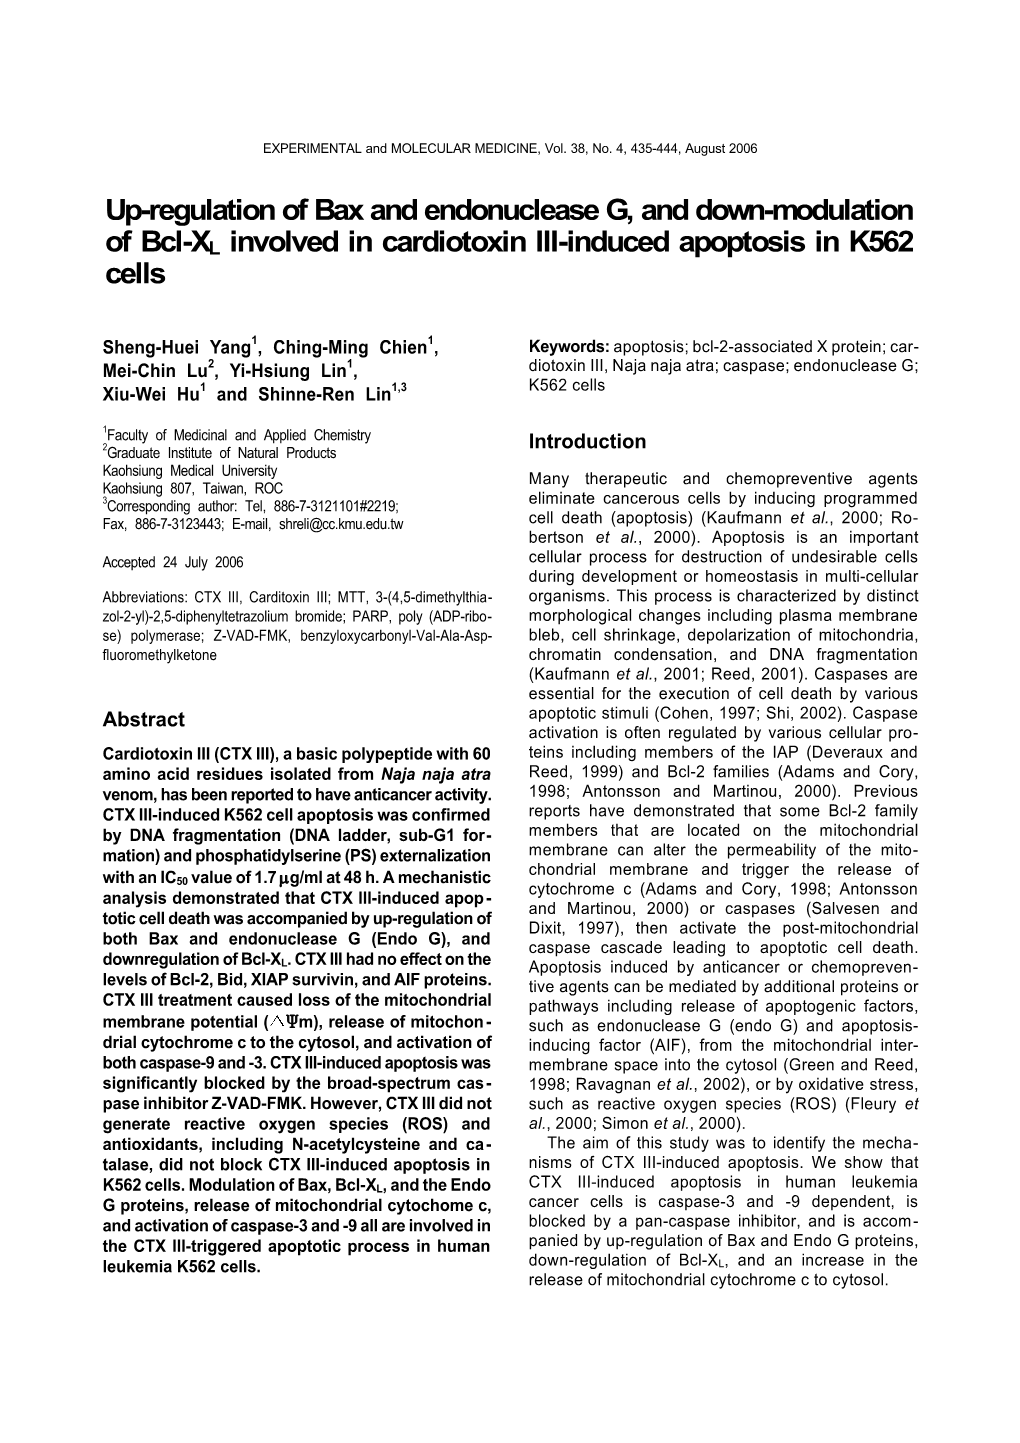 Up-Regulation of Bax and Endonuclease G, and Down-Modulation of Bcl-XL Involved in Cardiotoxin III-Induced Apoptosis in K562 Cells